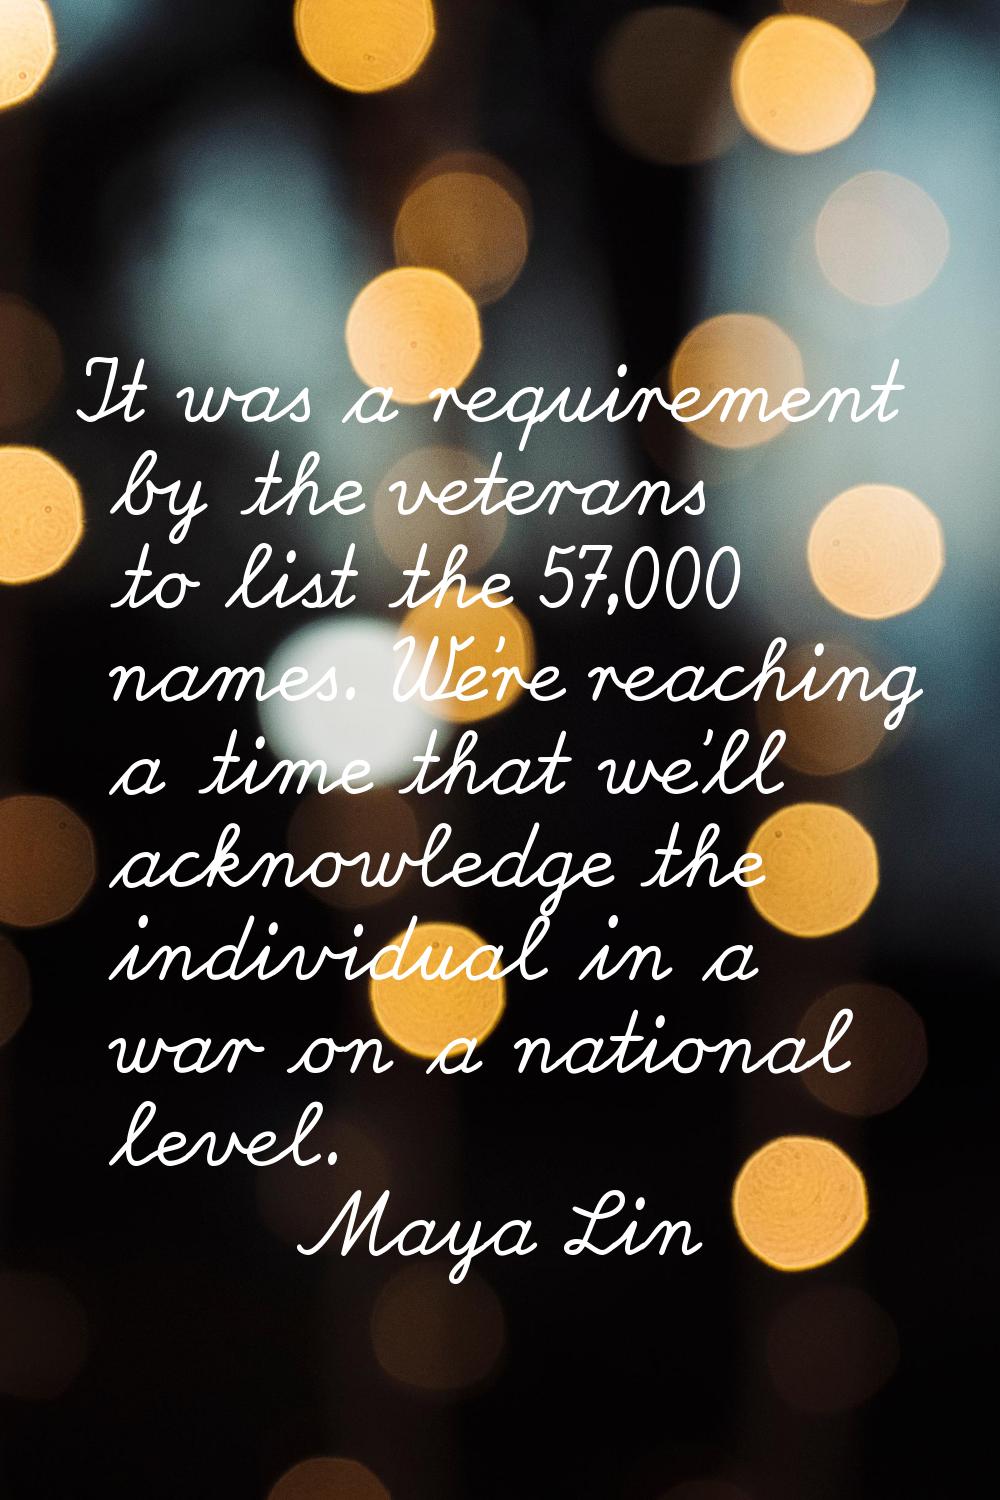 It was a requirement by the veterans to list the 57,000 names. We're reaching a time that we'll ack